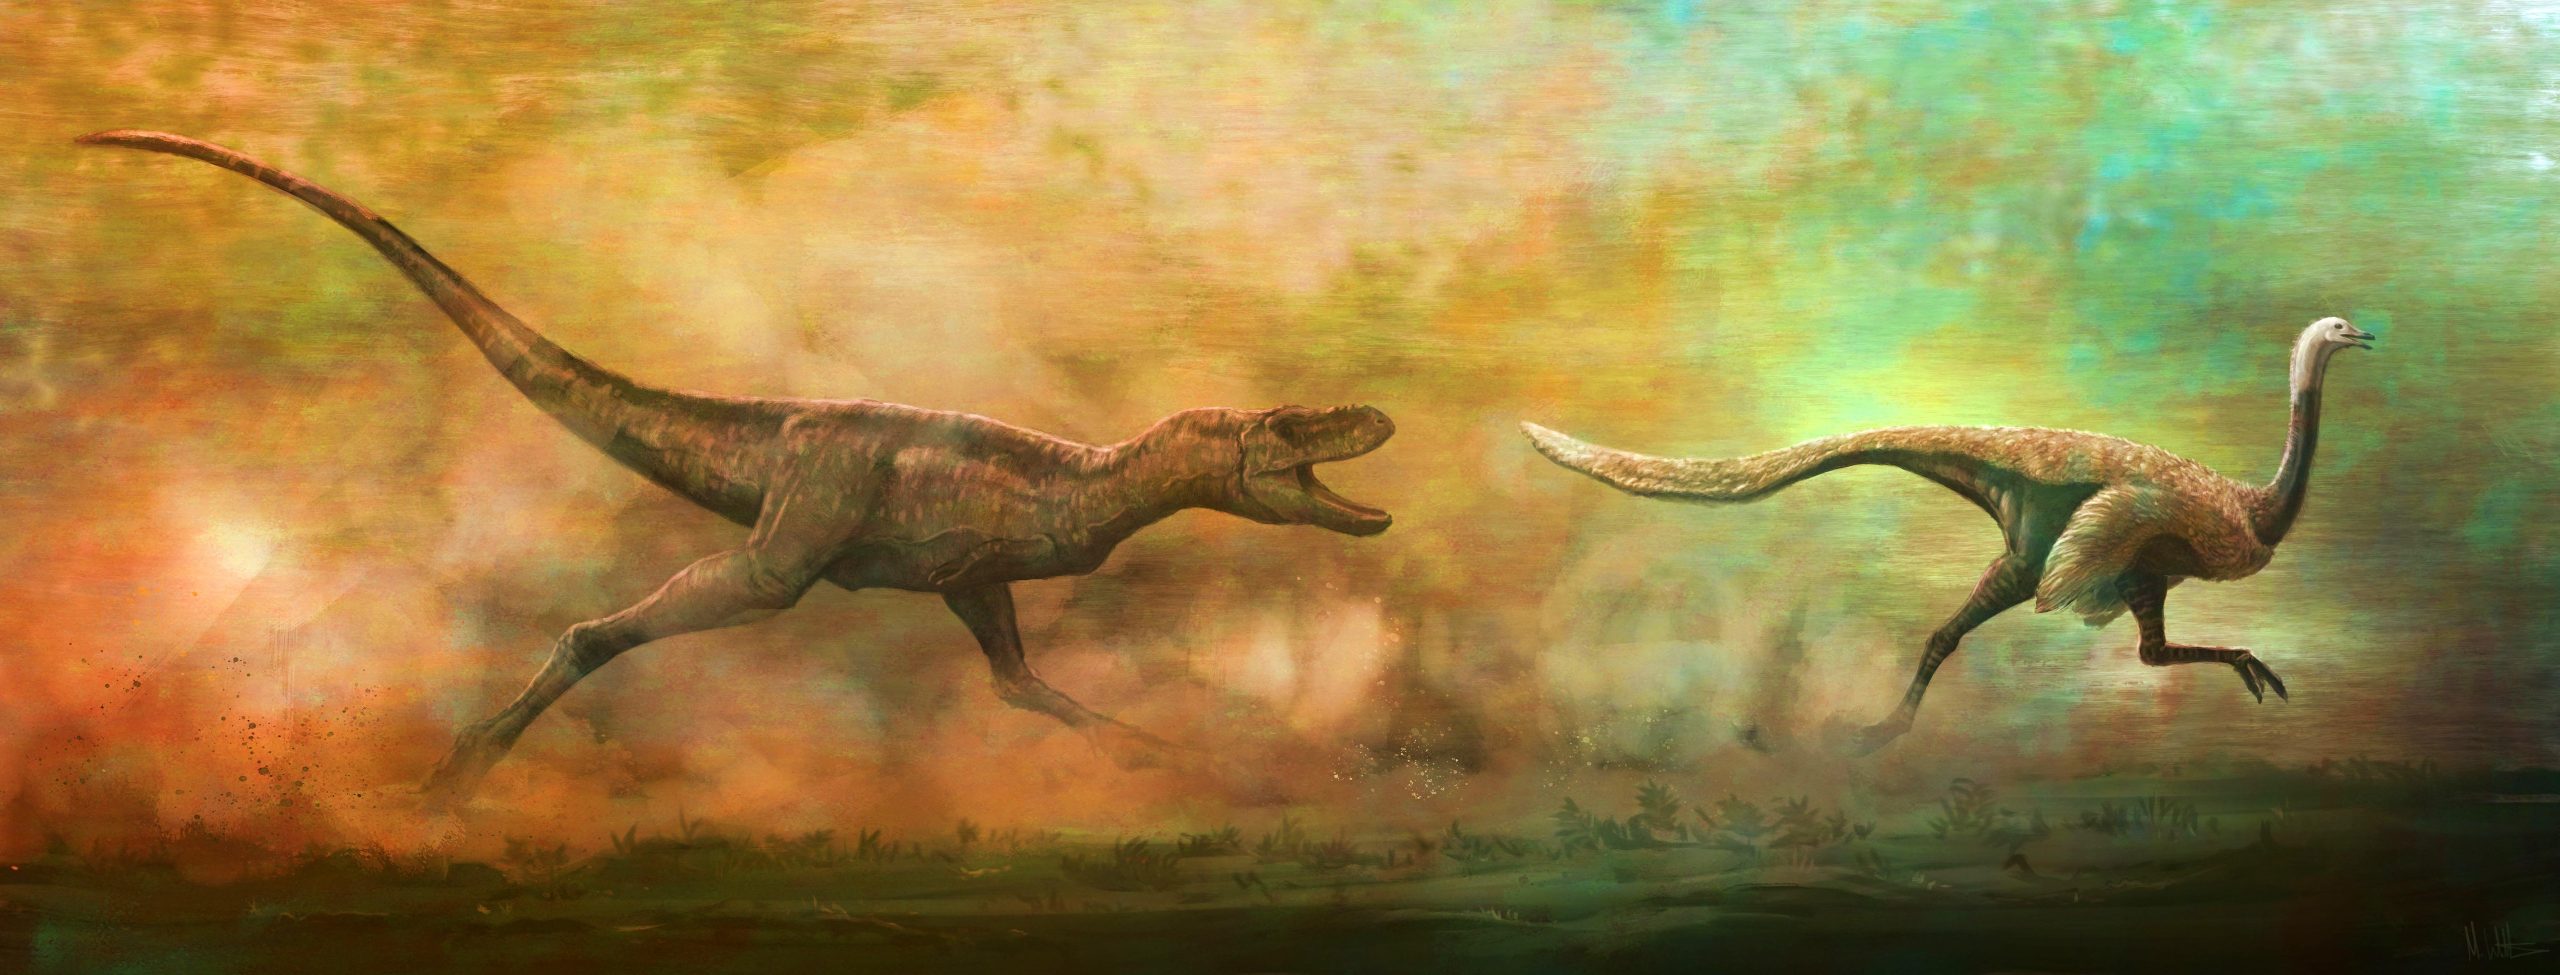 Scientists debunk bold theory of T. rex as 3 species